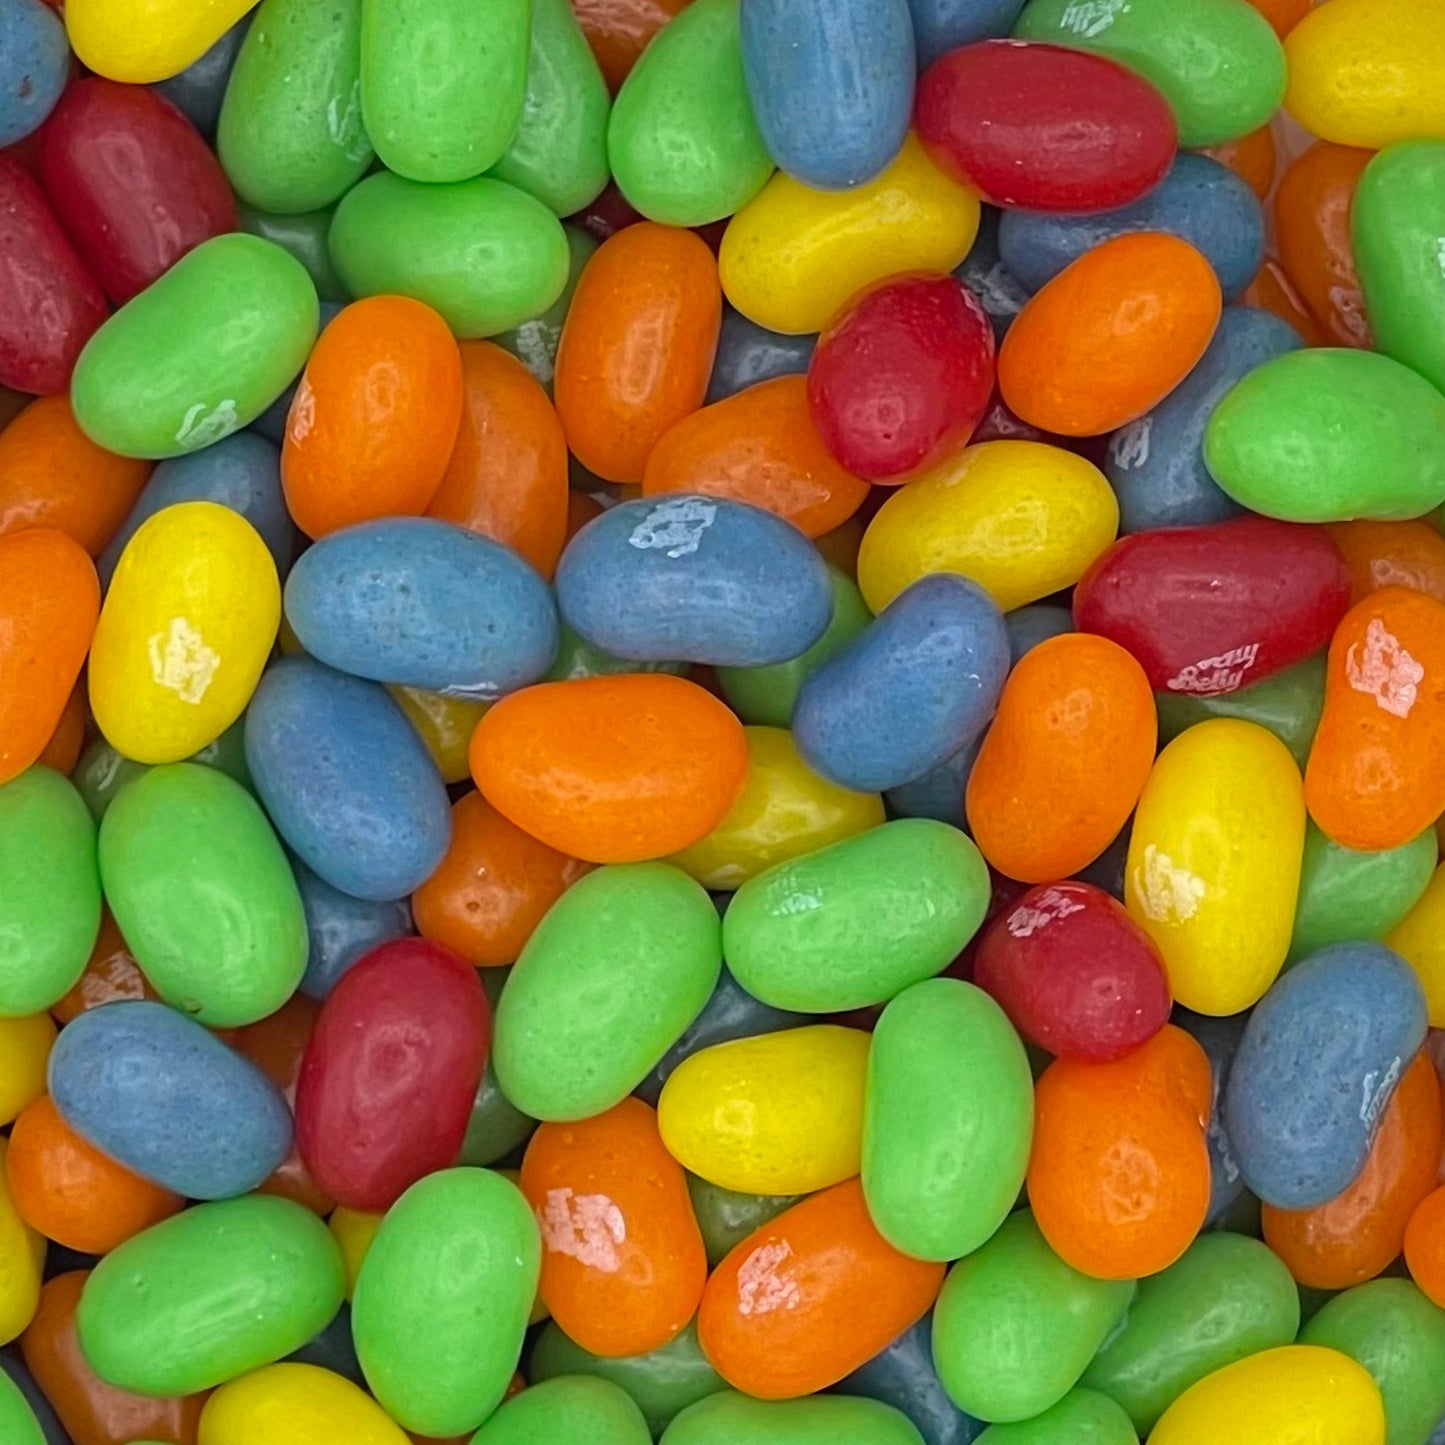 Jelly Belly Sours